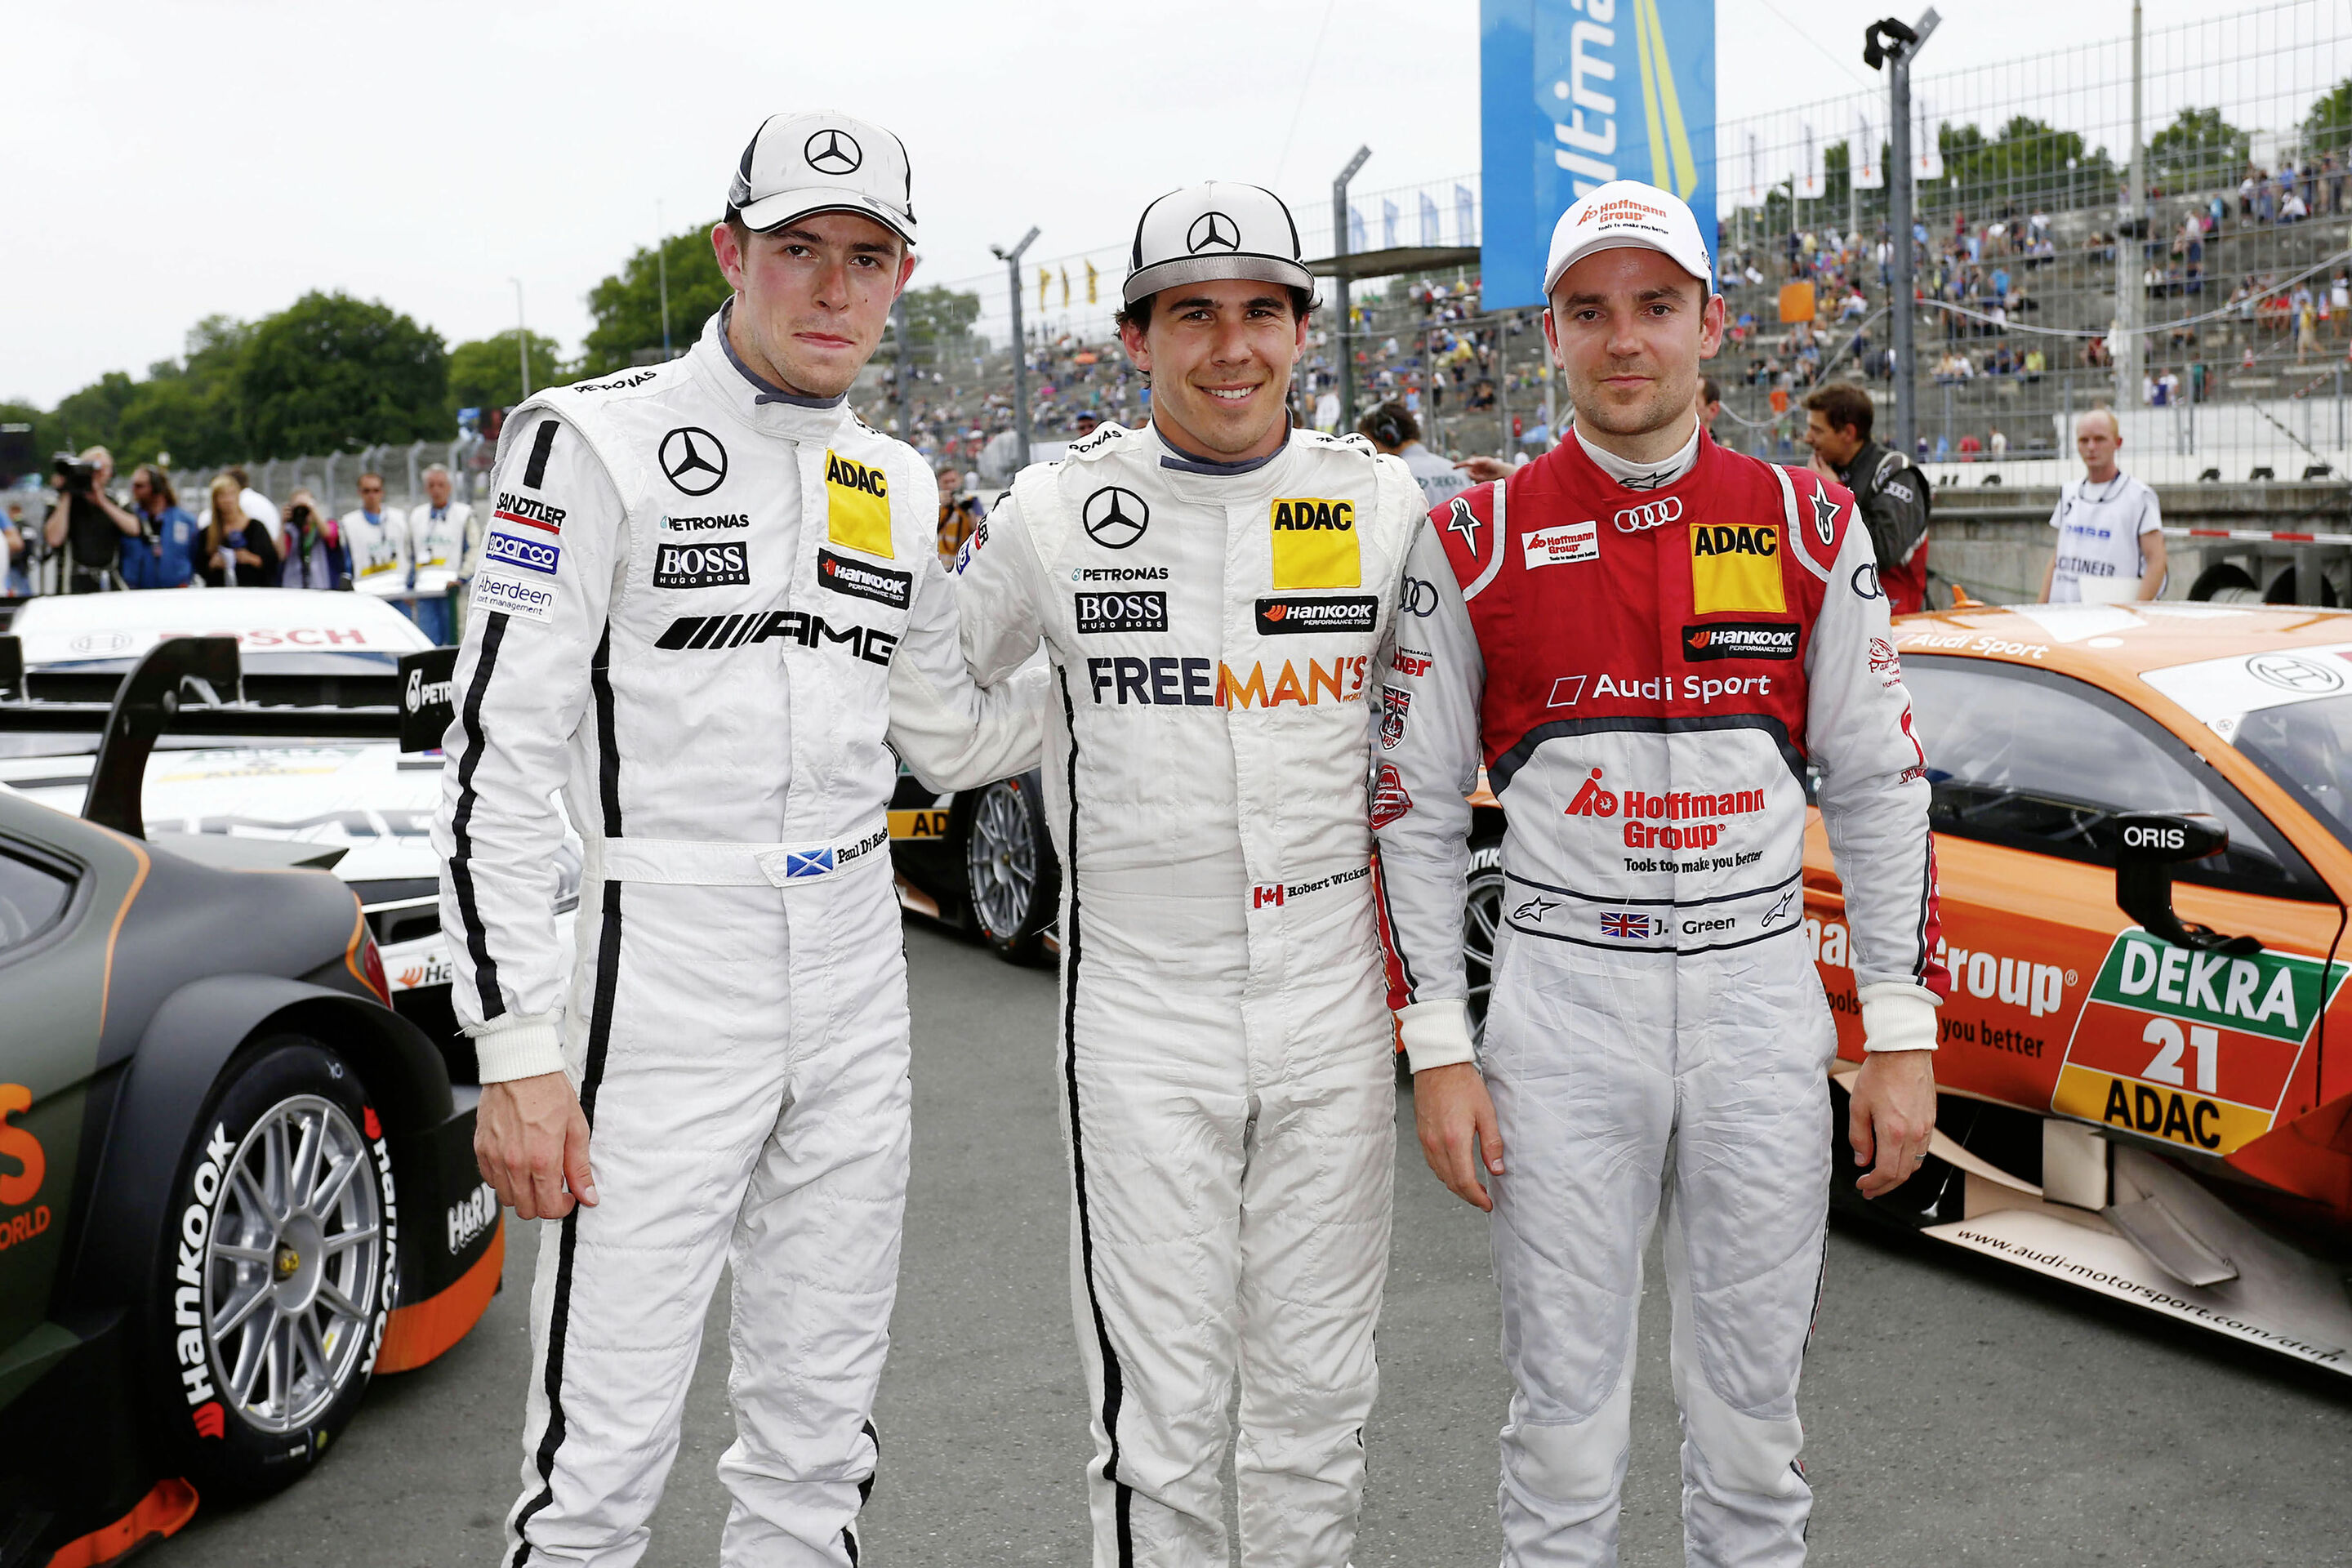 Quotes after qualifying at Norisring